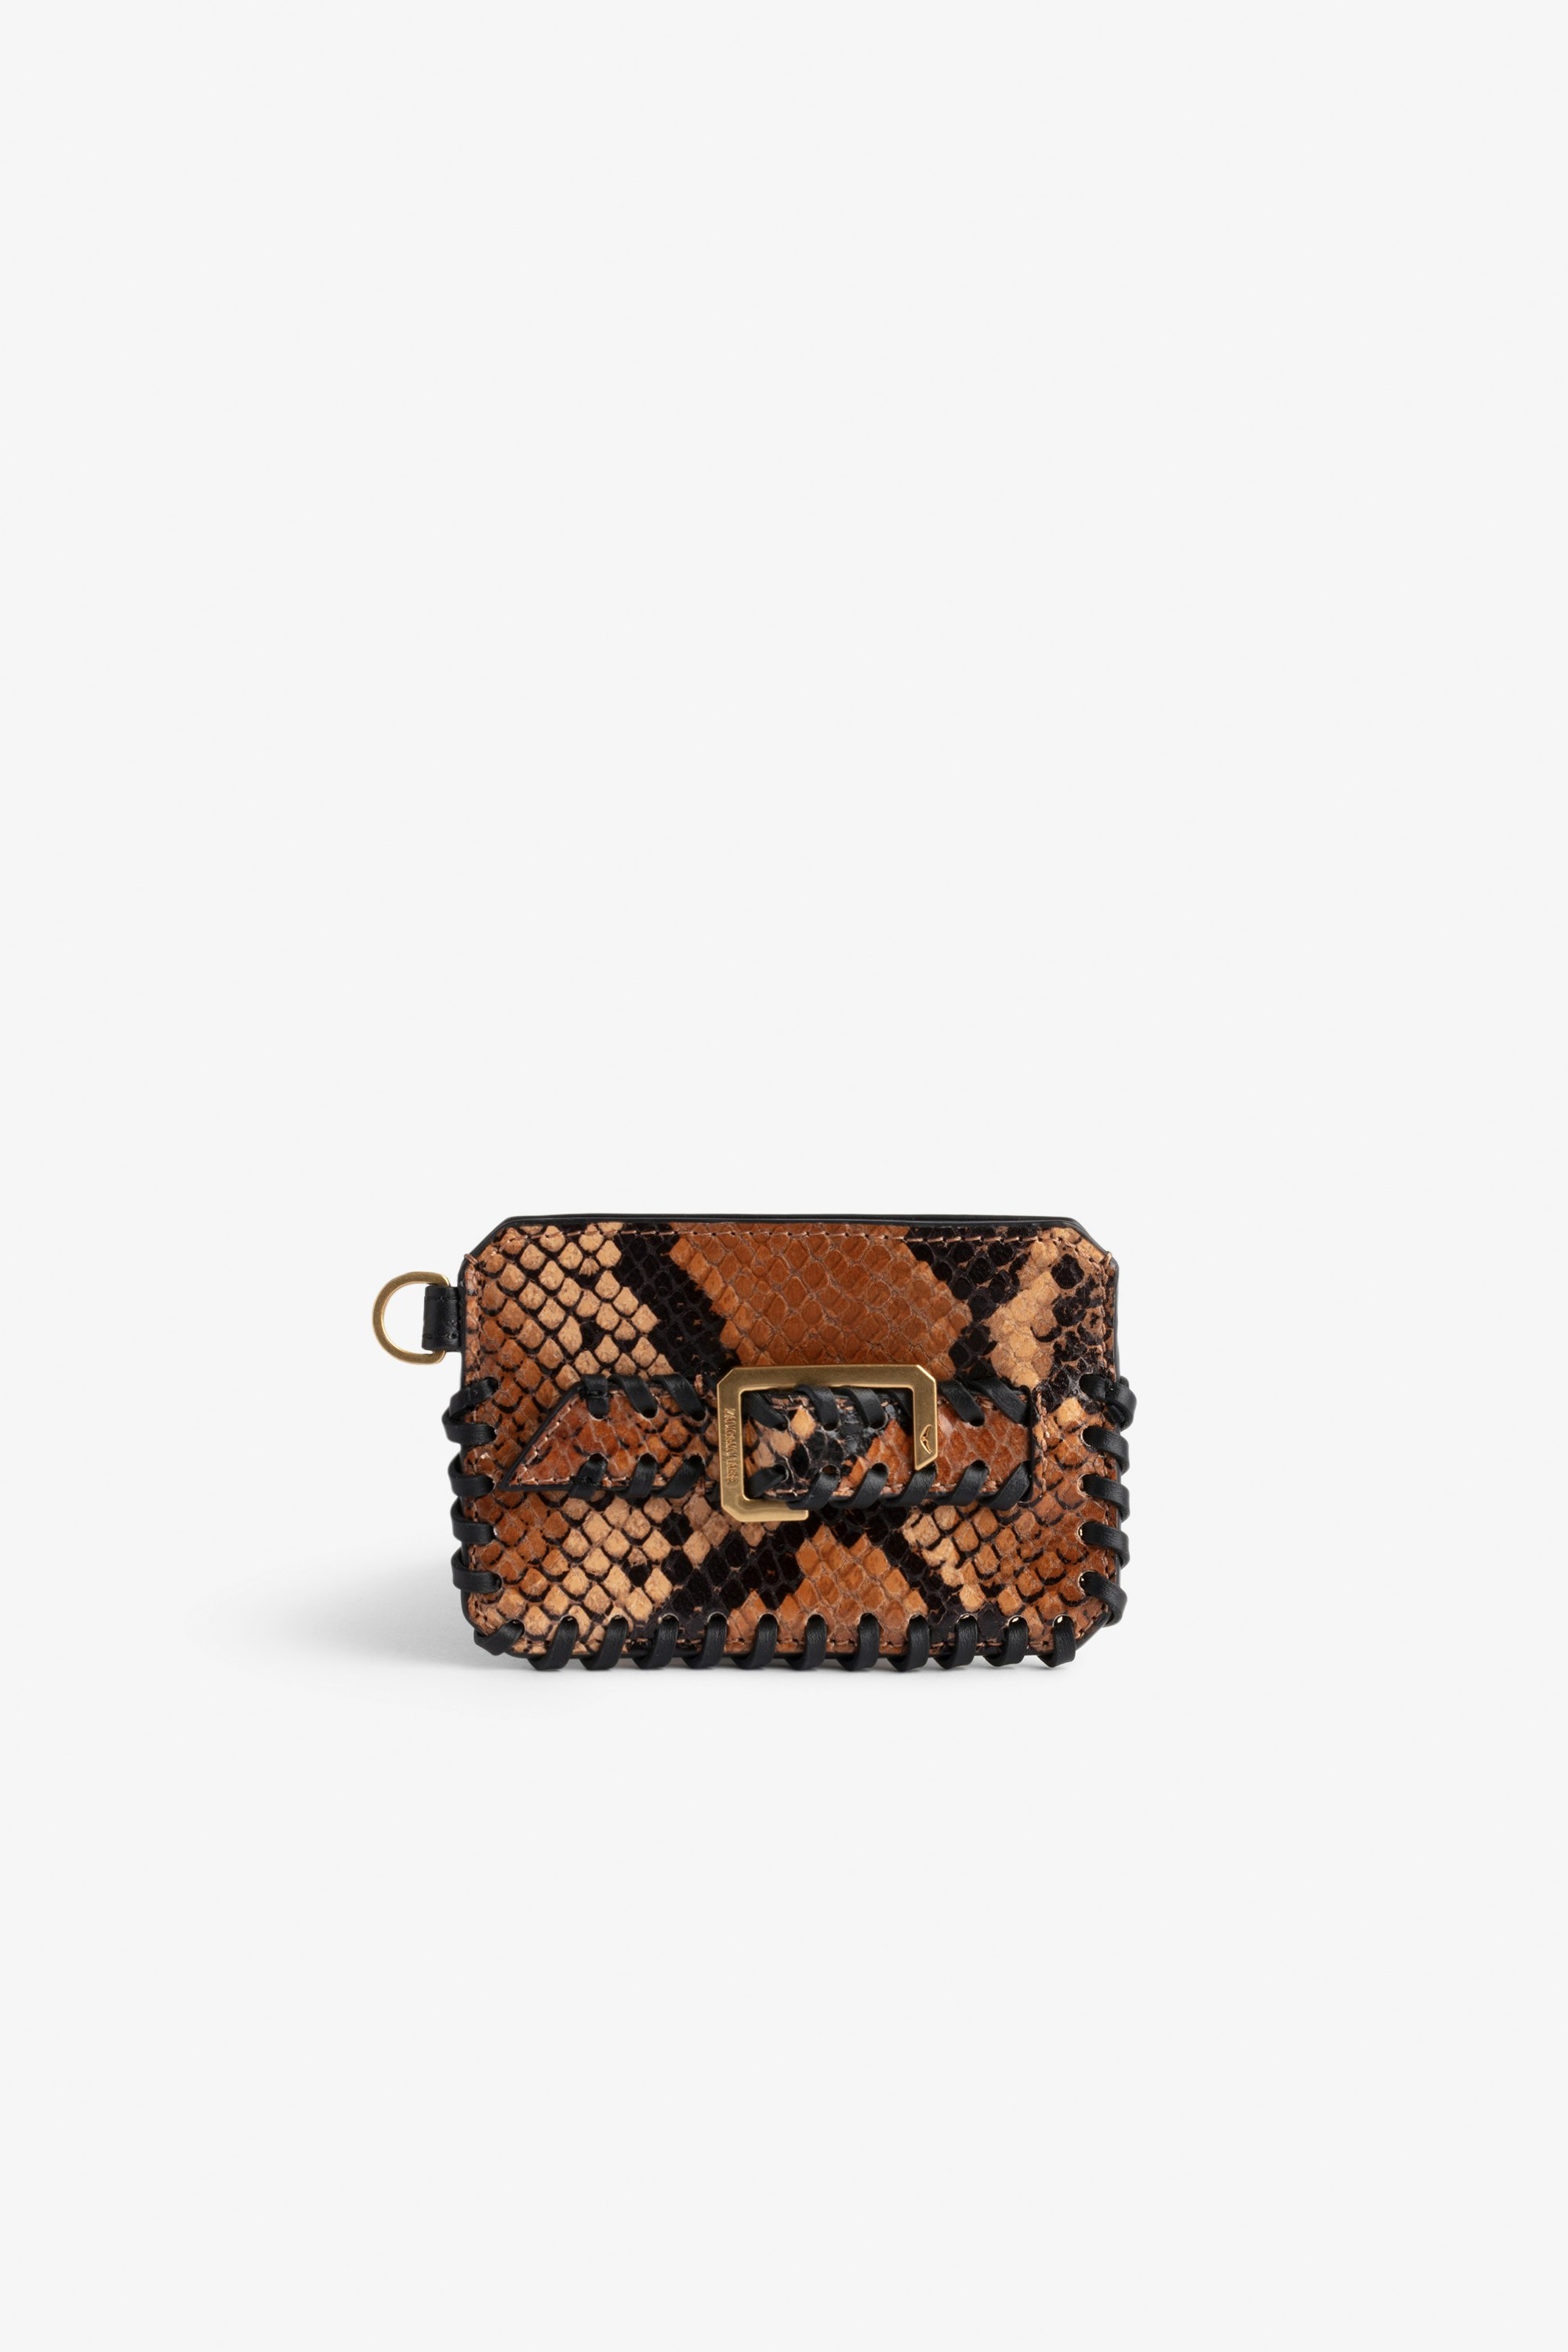 Le Cecilia Pass Card Case Women’s card case in brown python-effect leather, with a C-shaped buckle and braided edges